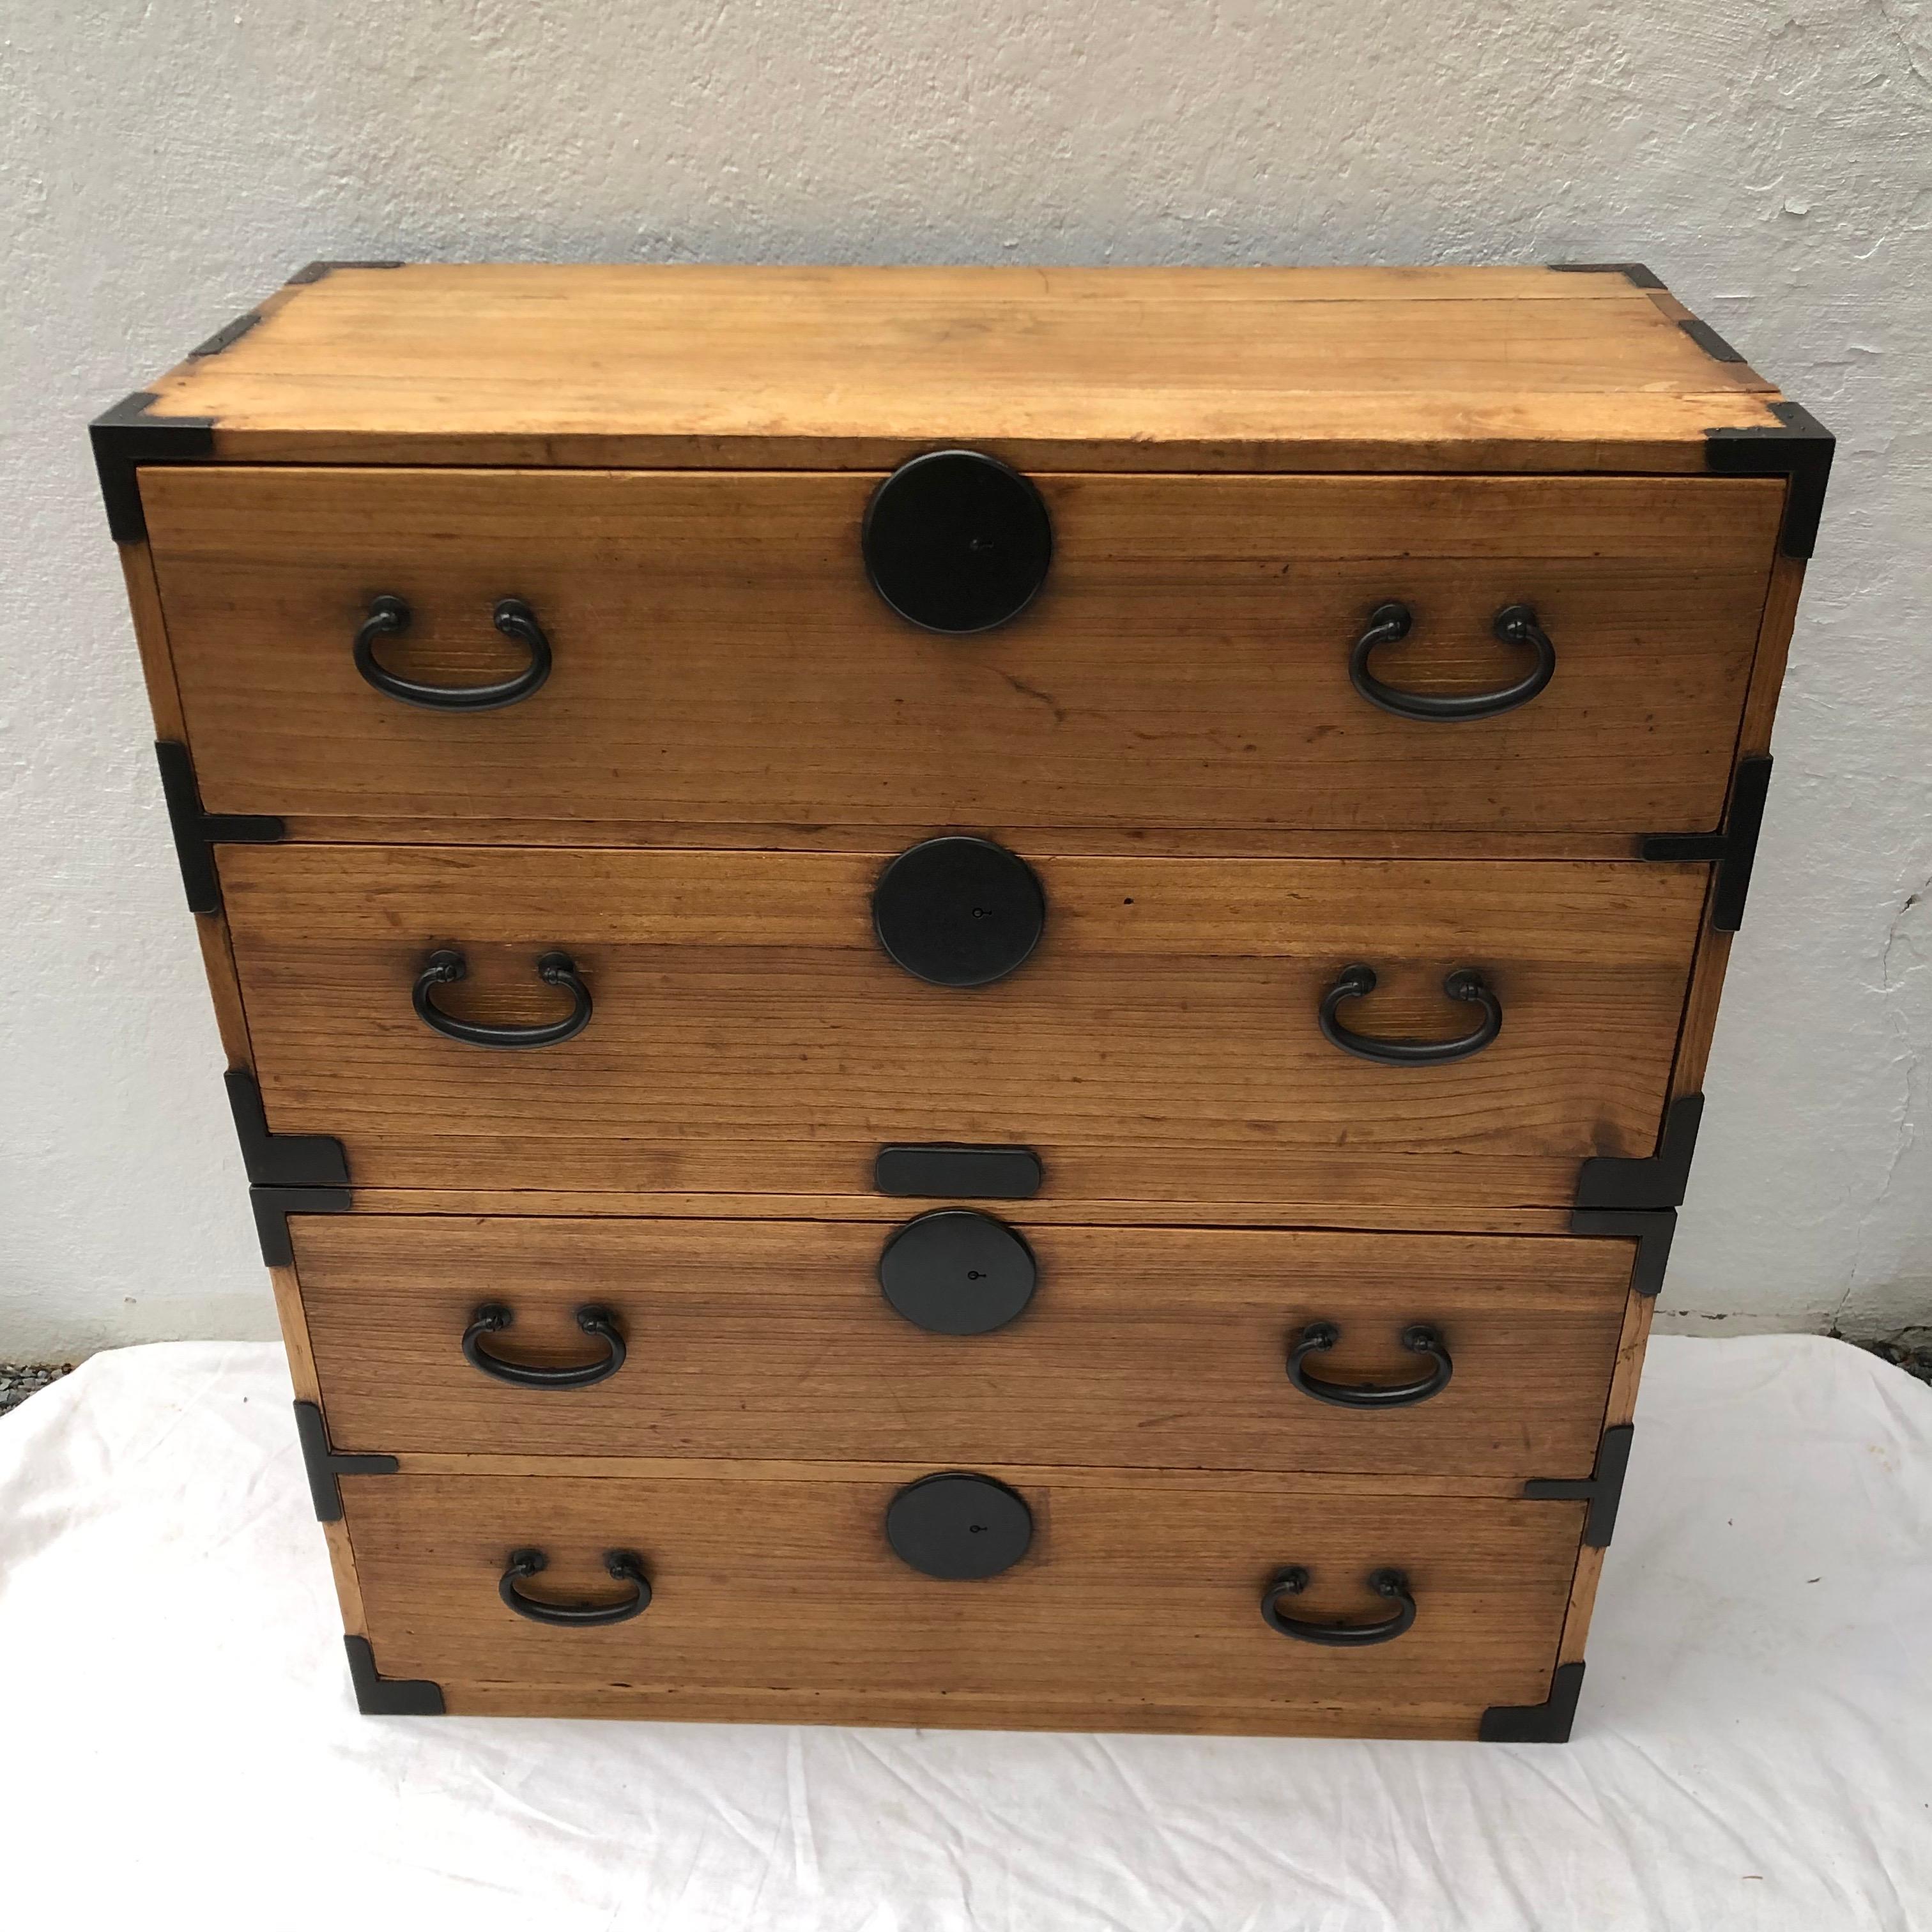 Elegant natural wood tansu chest in two pieces.